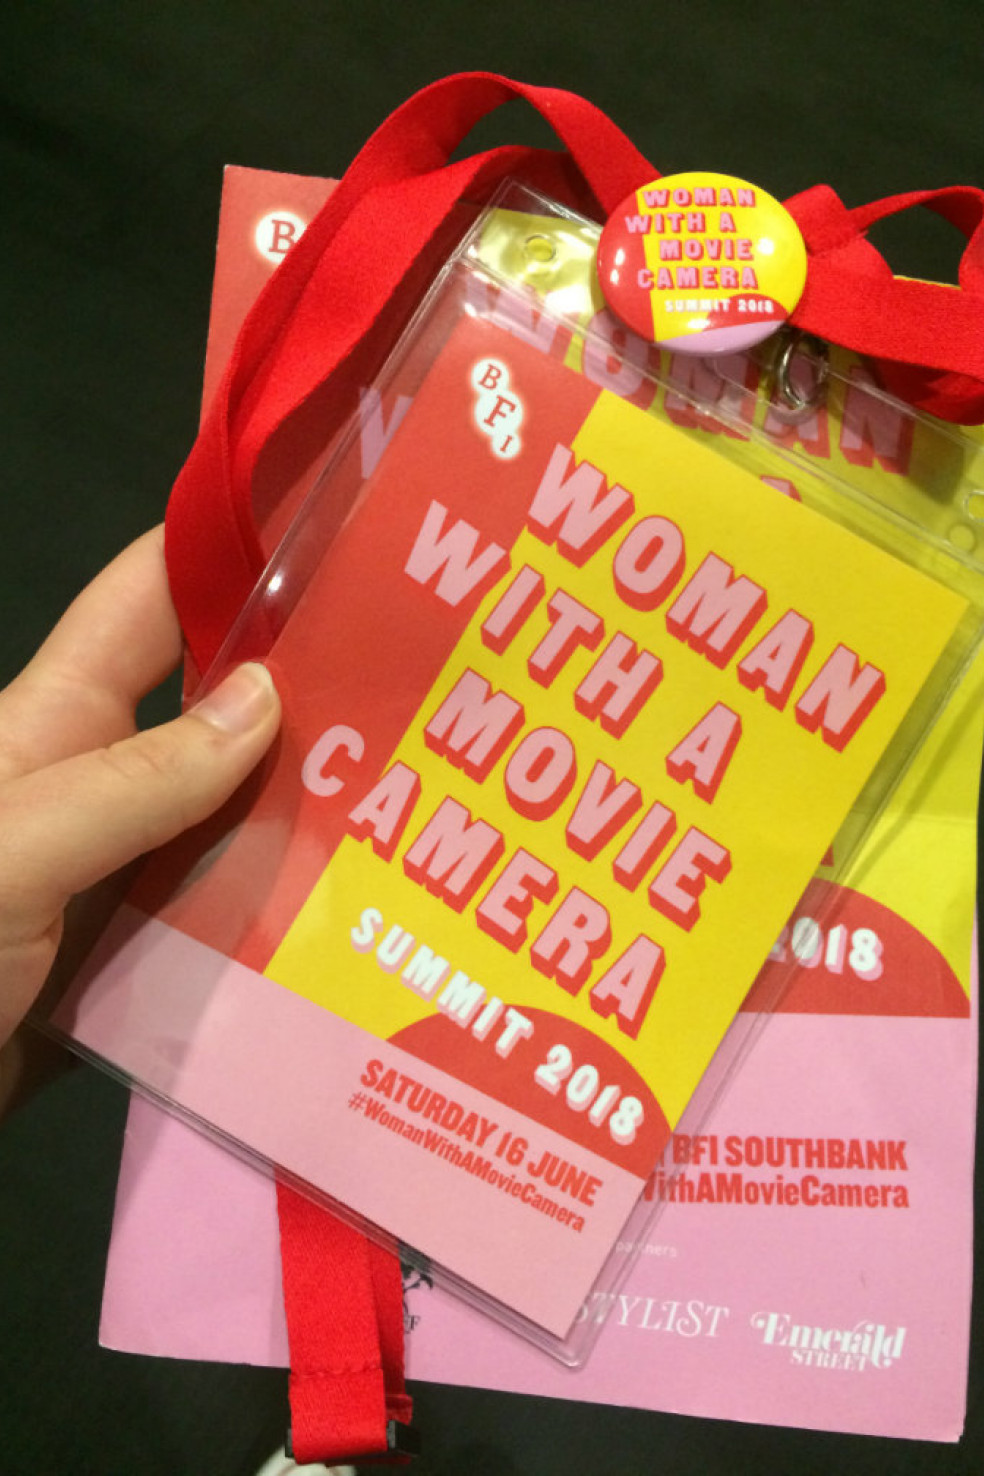 Tickets for the BFI's Woman with a Movie Camera